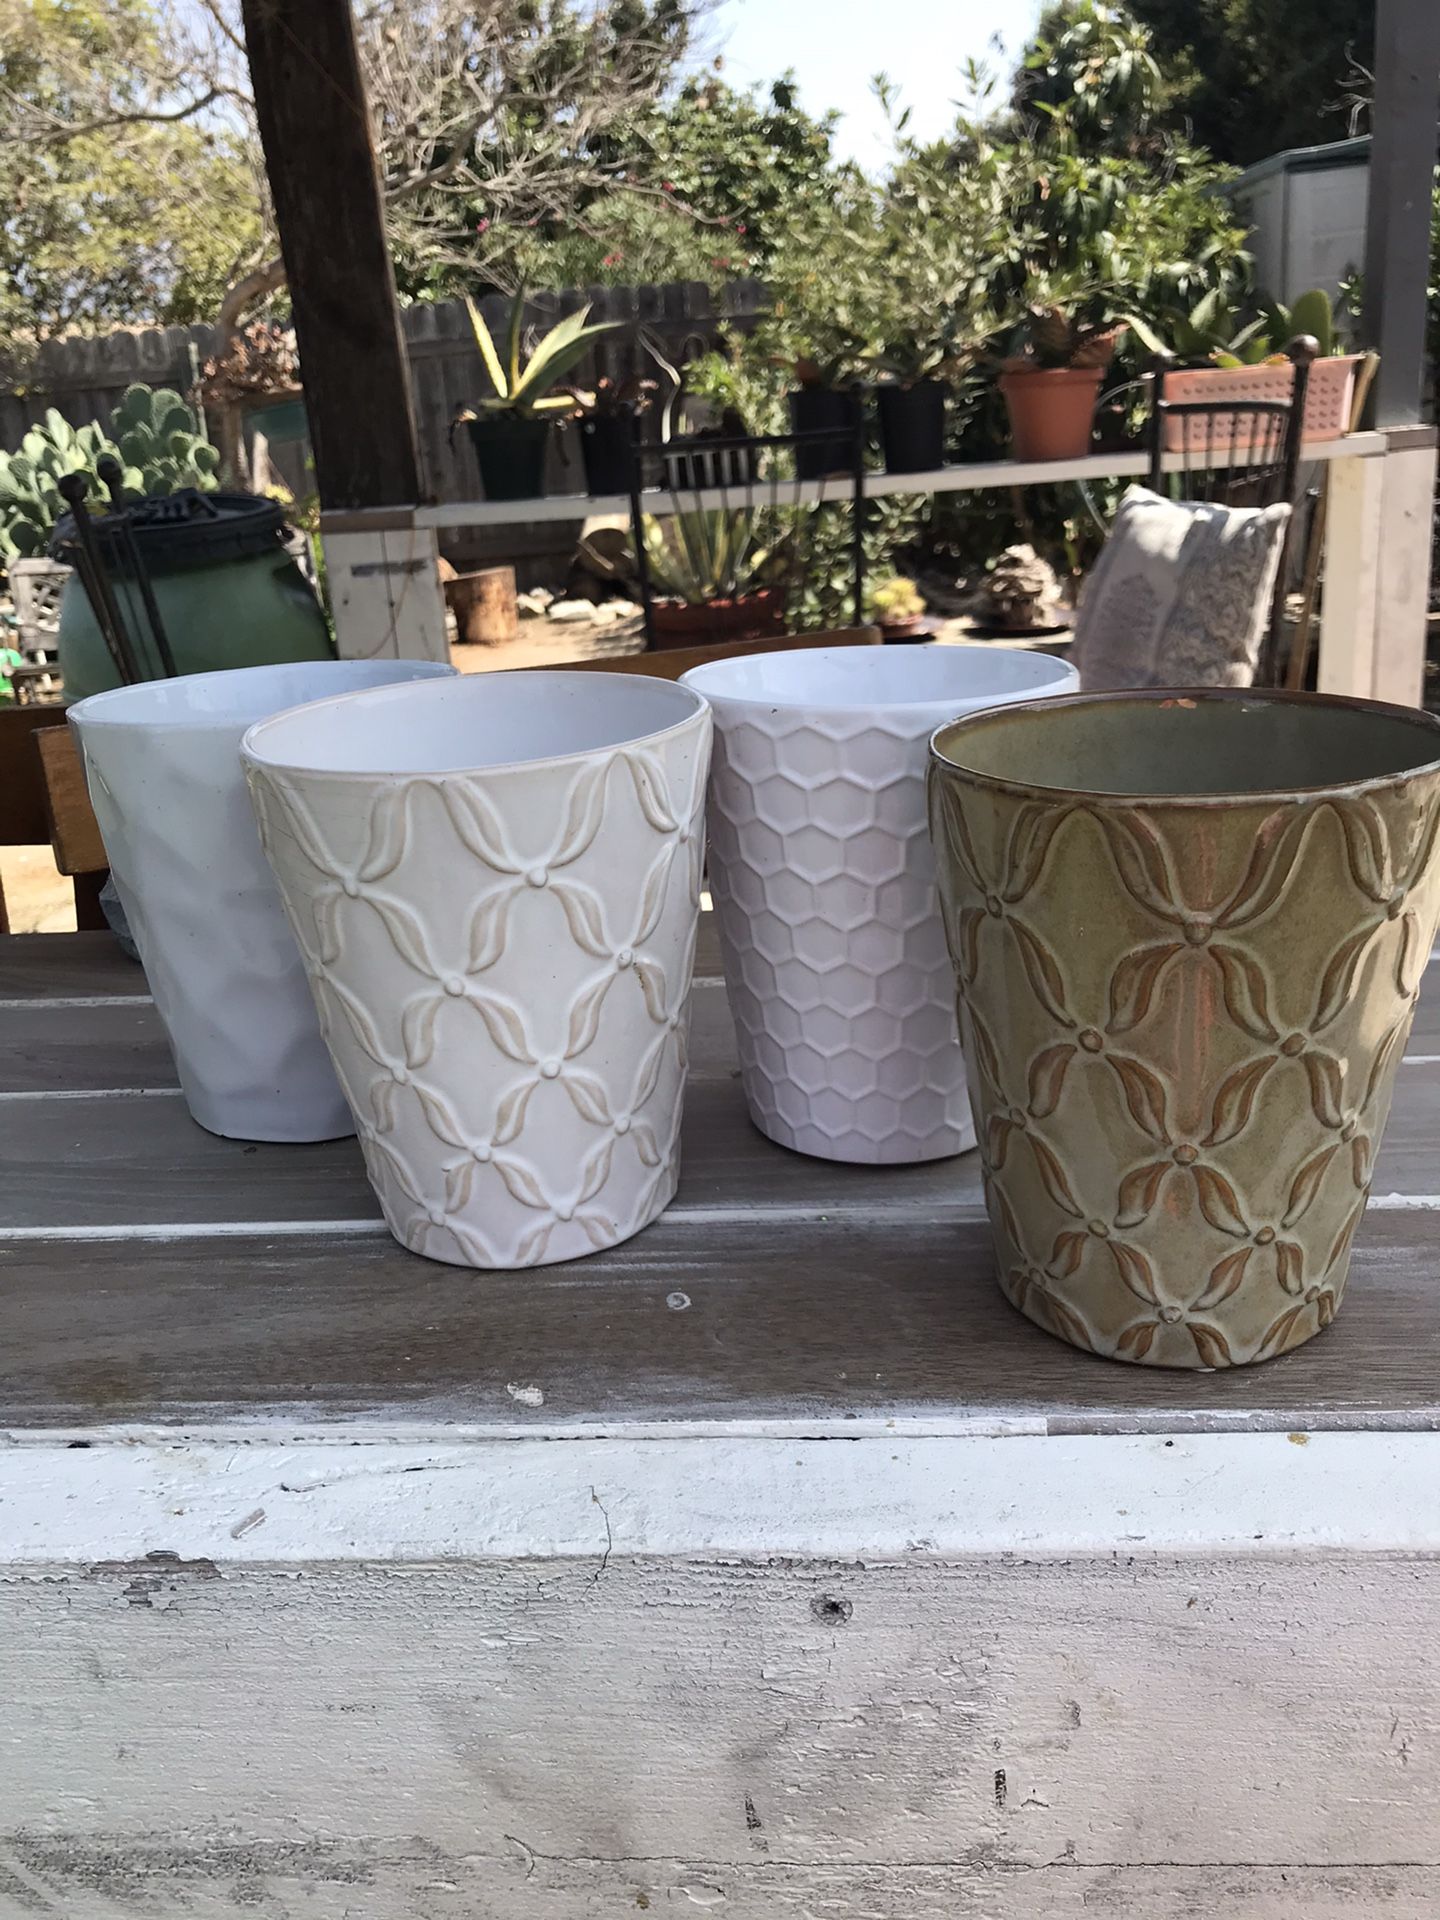 Flower pots , vases orchids see pics for size they are available